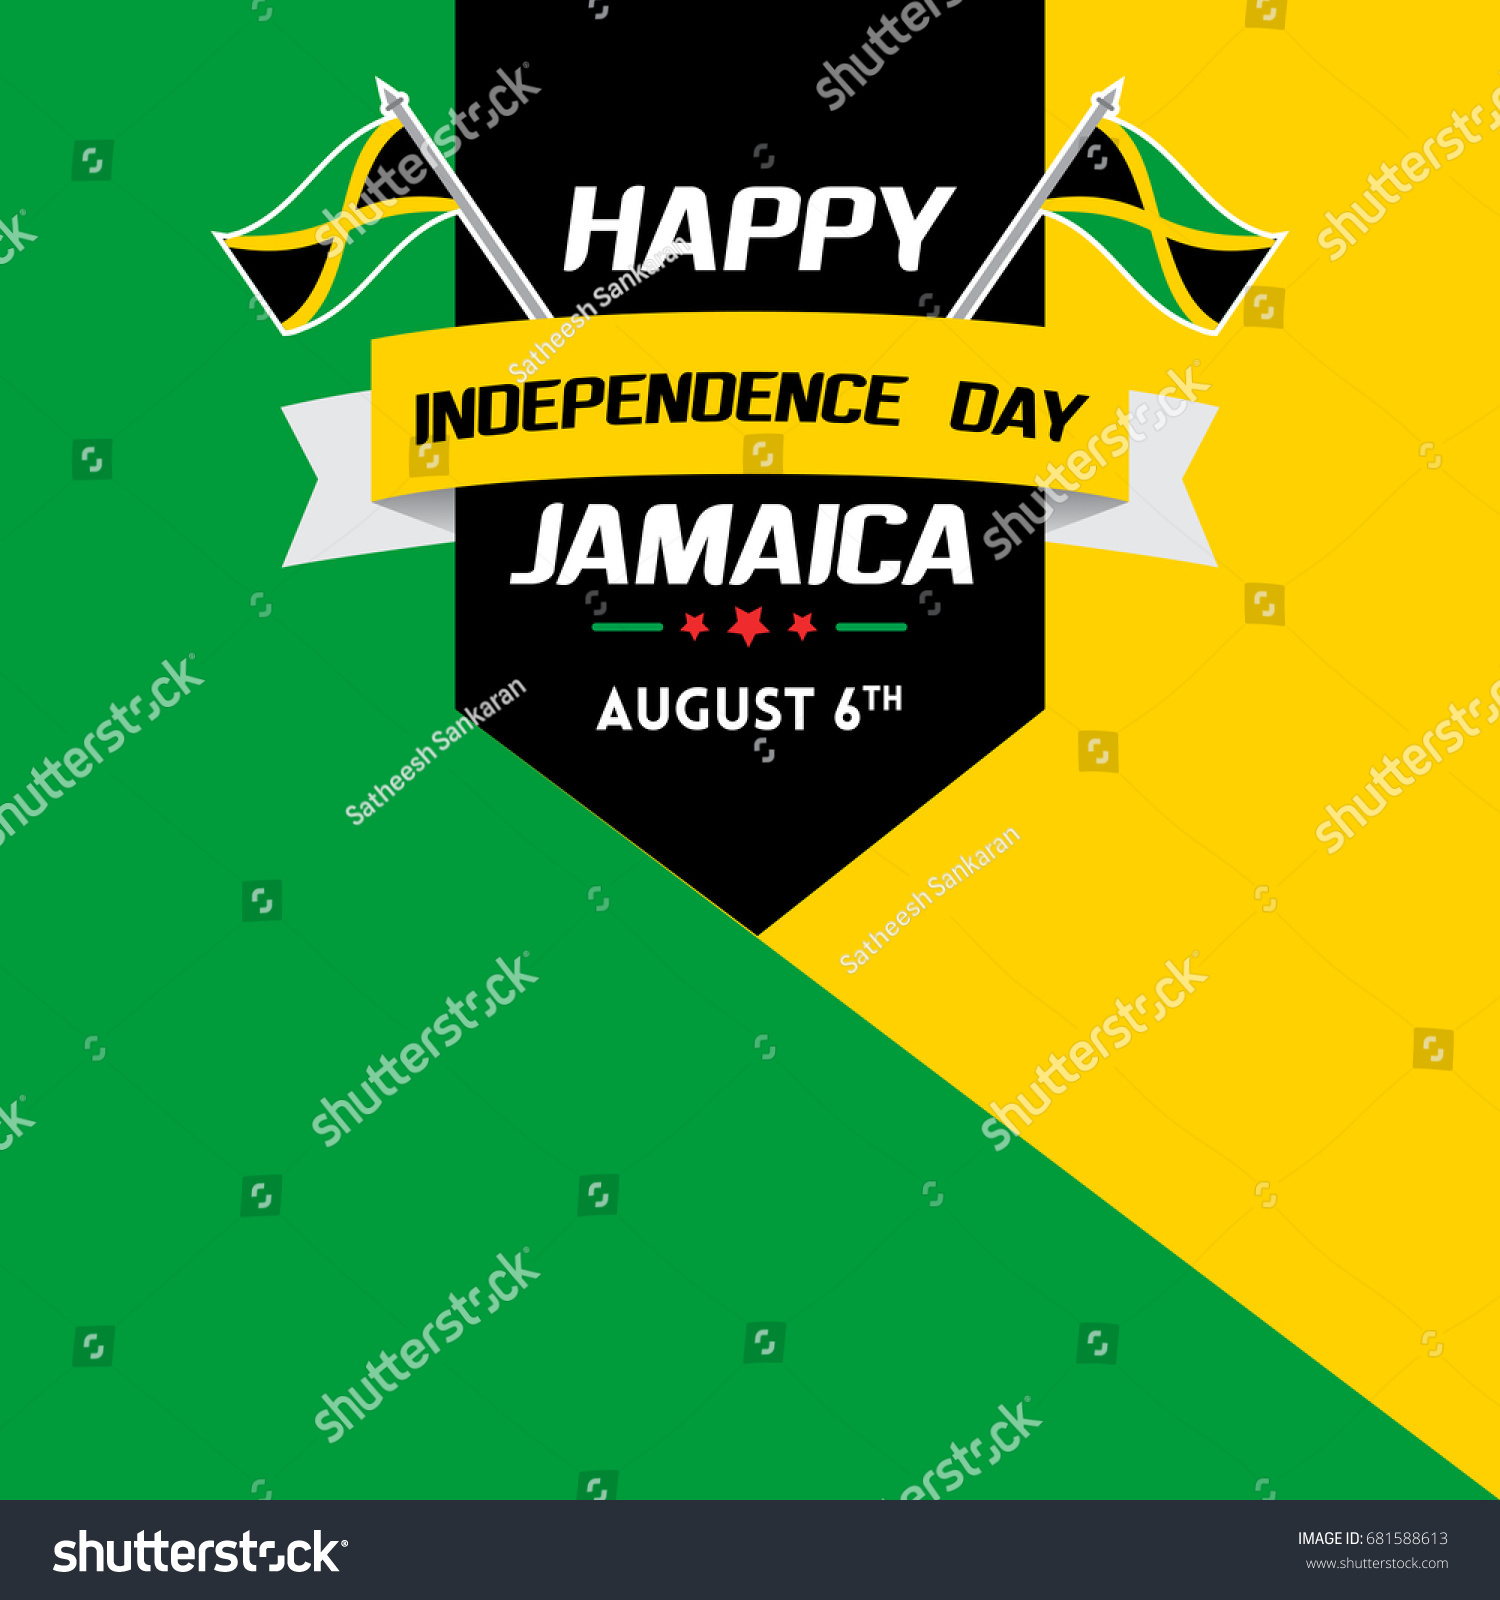 Happy Independence Day Celebration of Jamaica greetings and wishes. Creative concept vector illustration with flag and patriotic elements.  #681588613